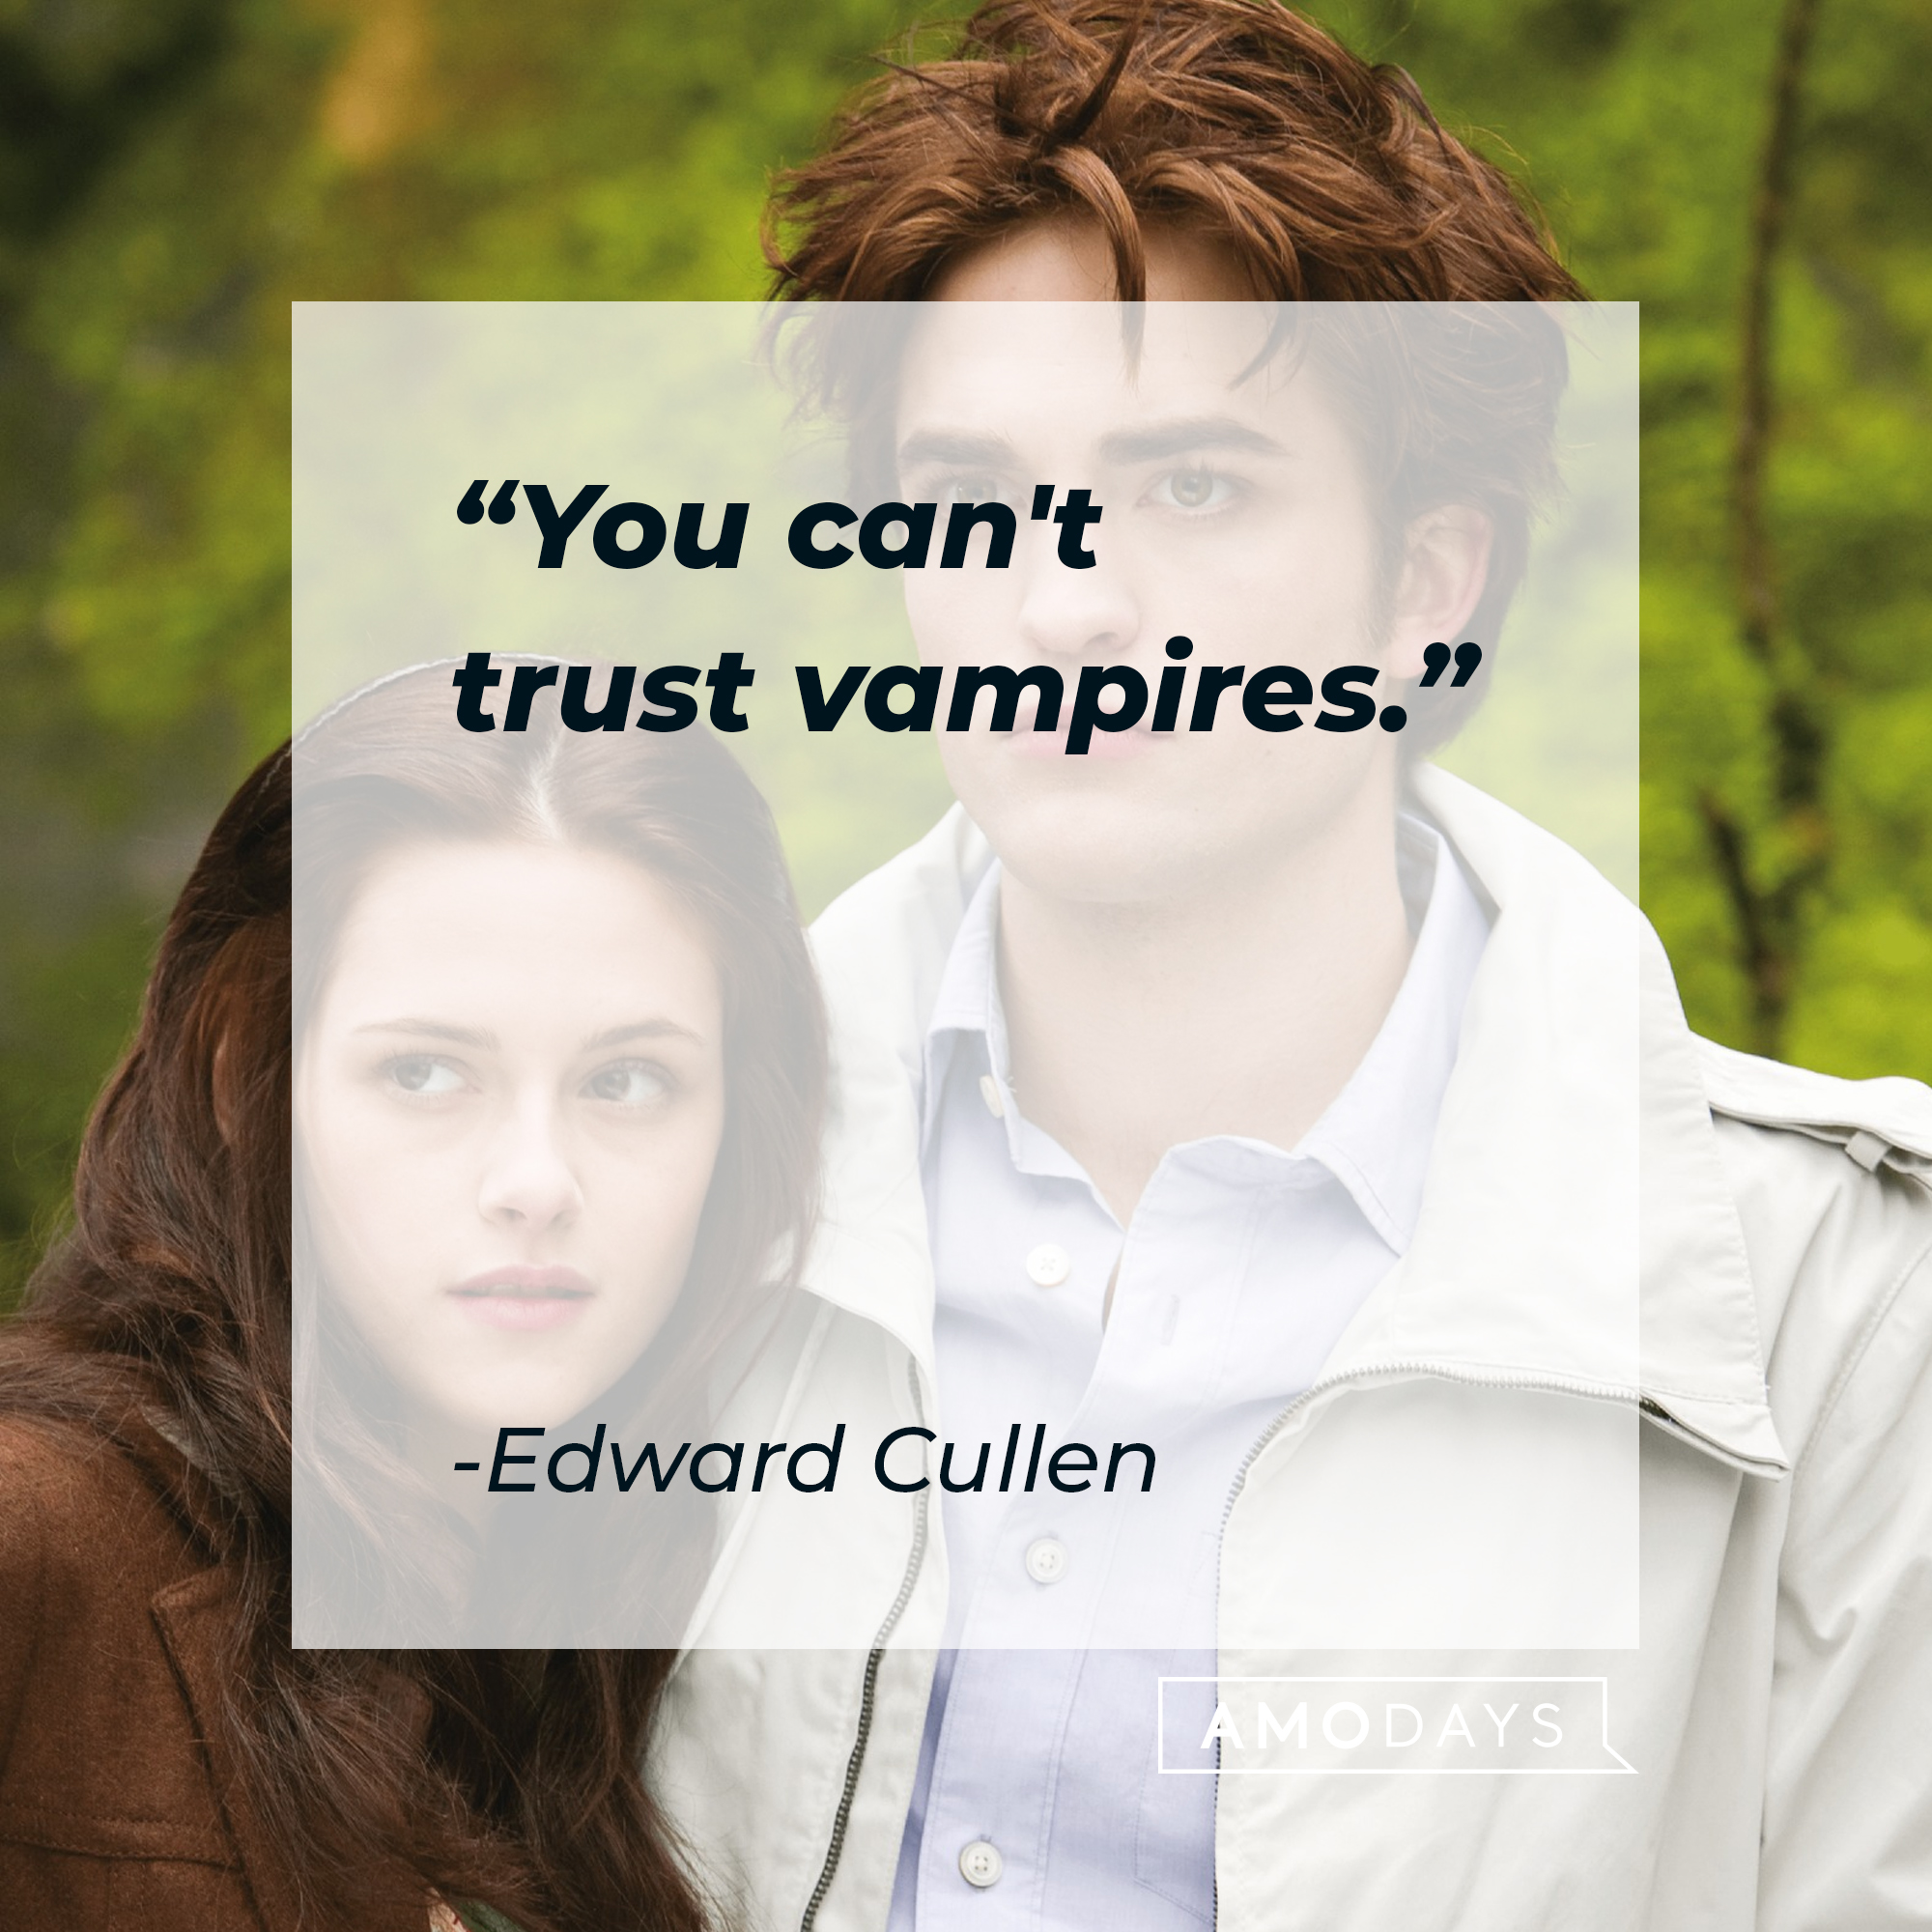 An image of Edward Cullen and Bella Swan, with Cullen’s quote: "You can't trust vampires." | Source: Facebook.com/twilight